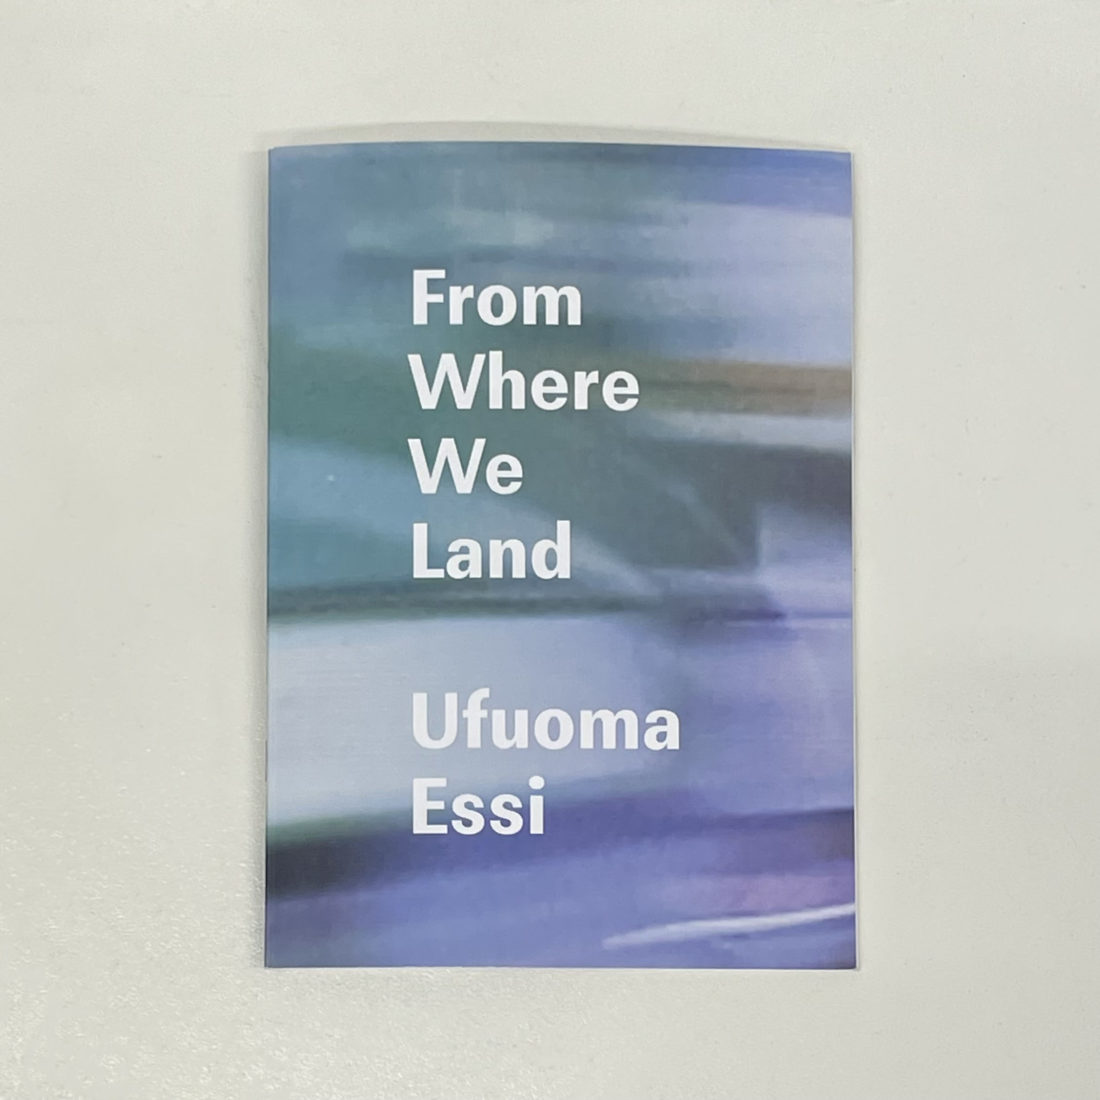 From Where We Land by Ufuoma Essi